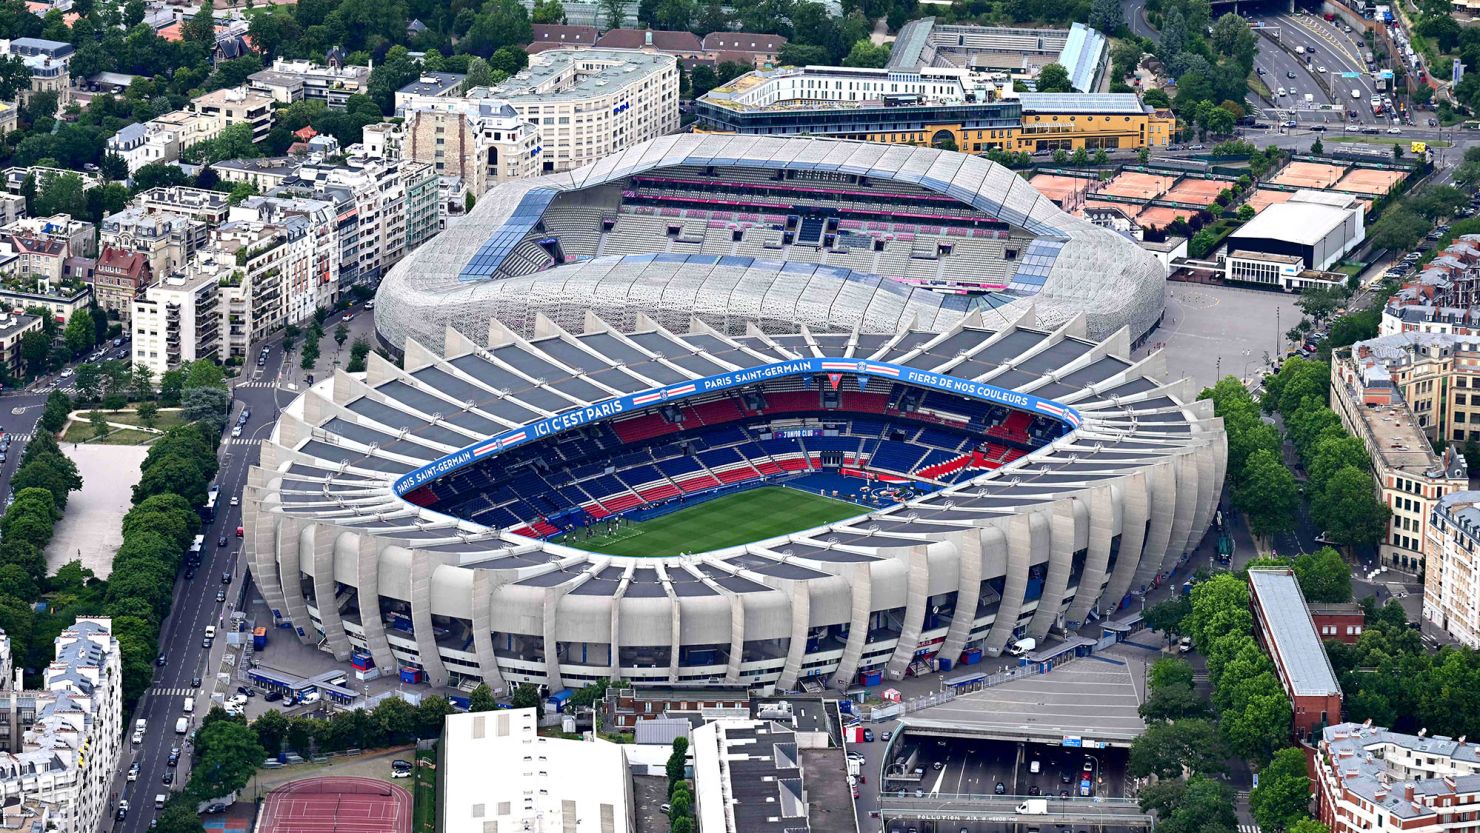 The Parc des Princes will host the Champions League quarterfinal between PSG and Barcelona.